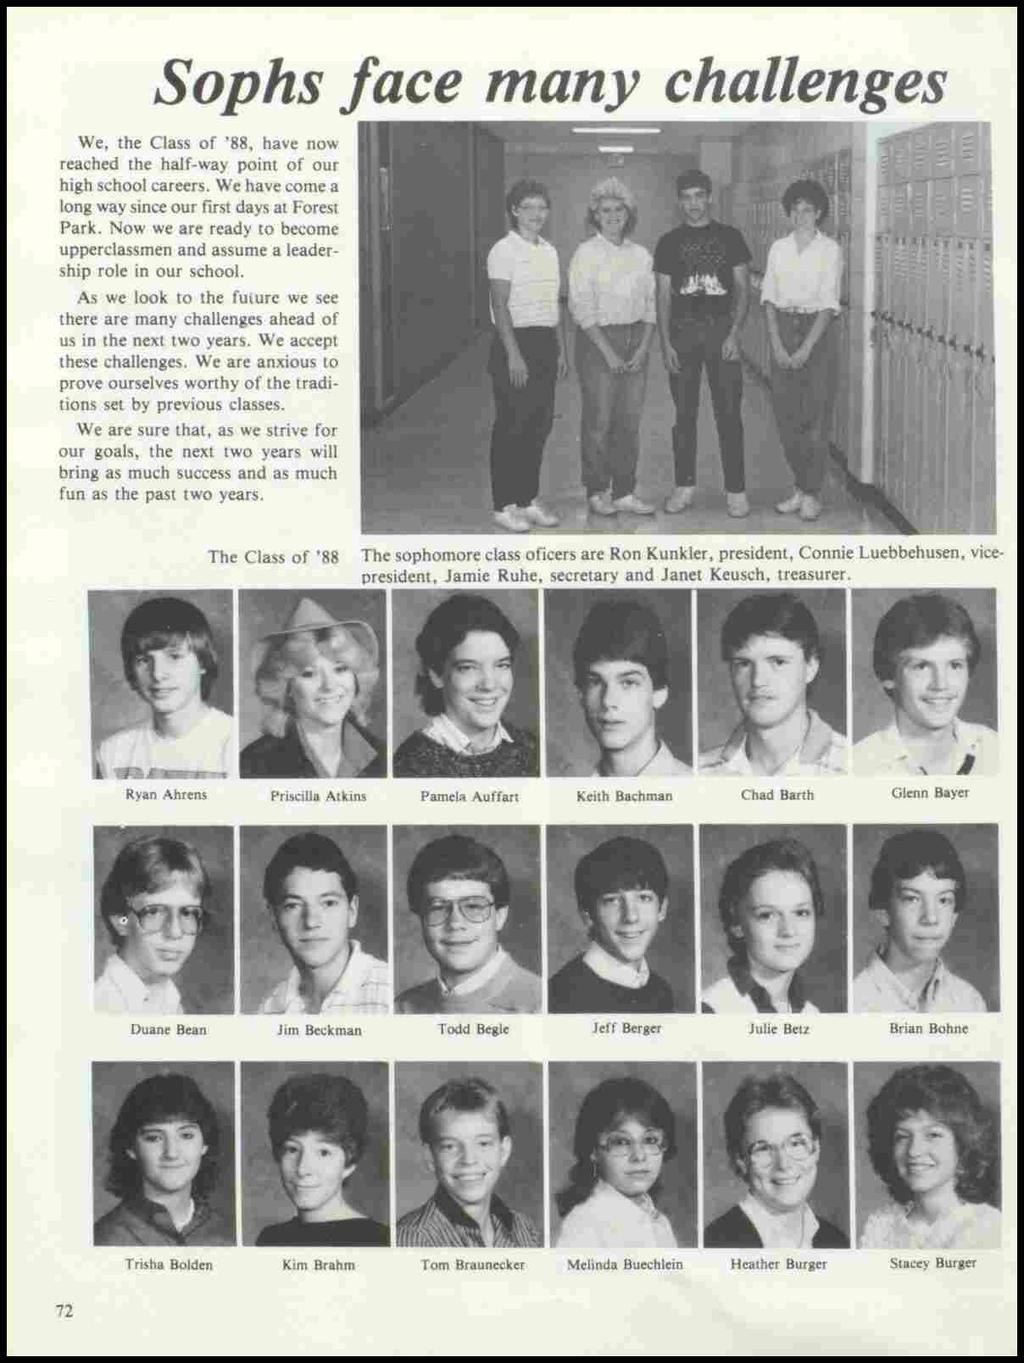 We, the Class of '88, have now reached the half-way point of our high school careers. We have come a long way since our first days at Forest Park.